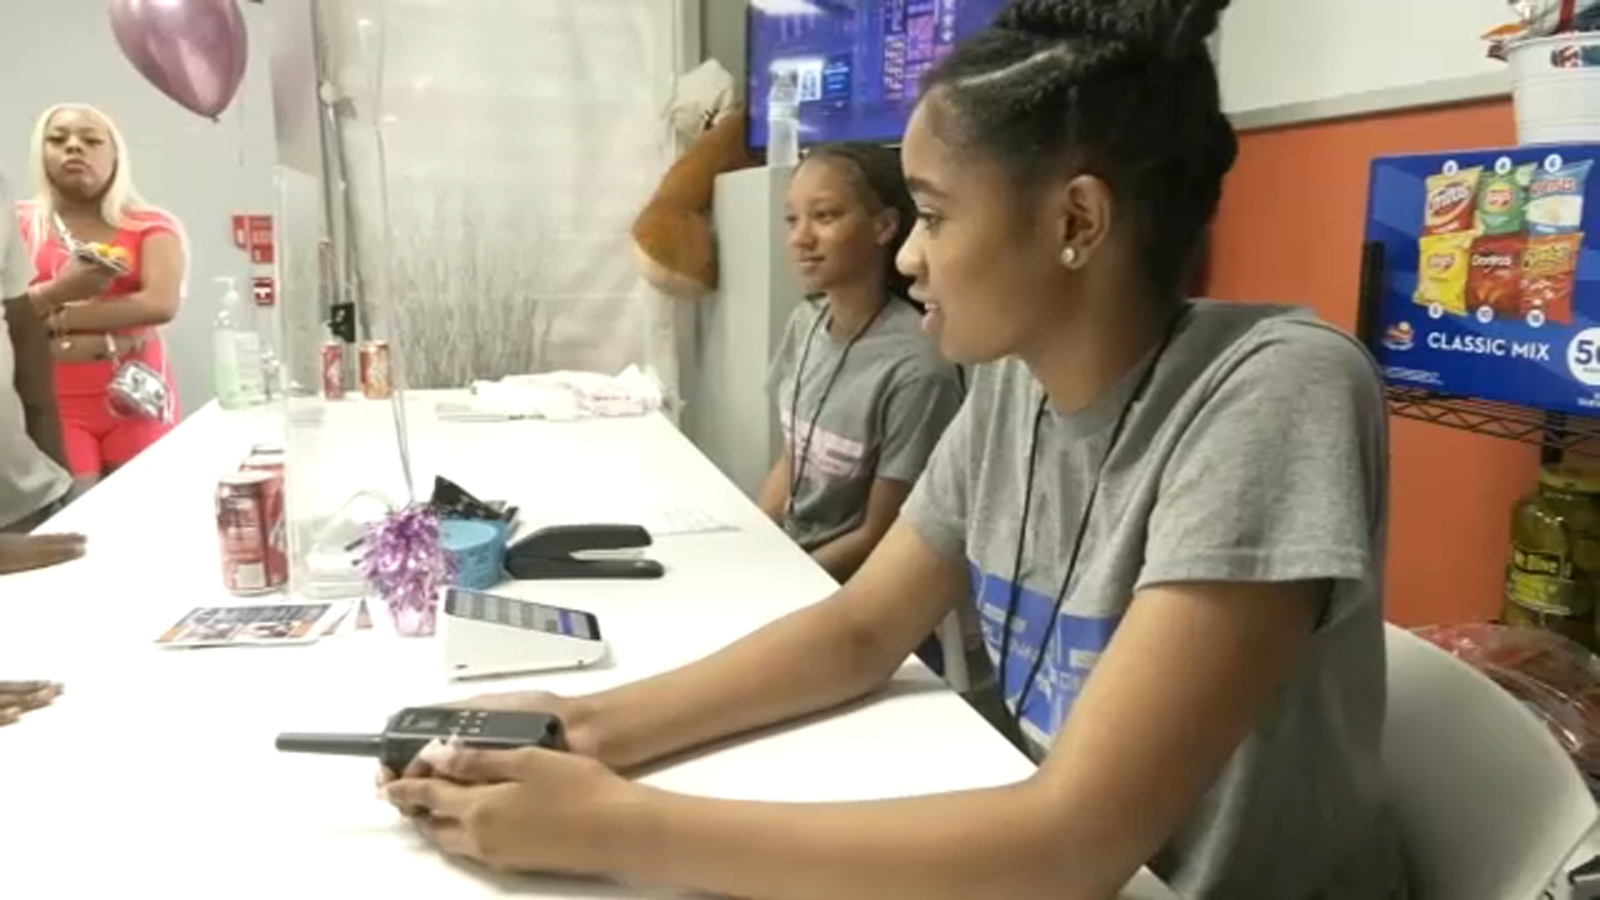 P.O.O.F | Durham after-school program Planning Our Own Future plans Jamaica visit for teen entrepreneurs [Video]